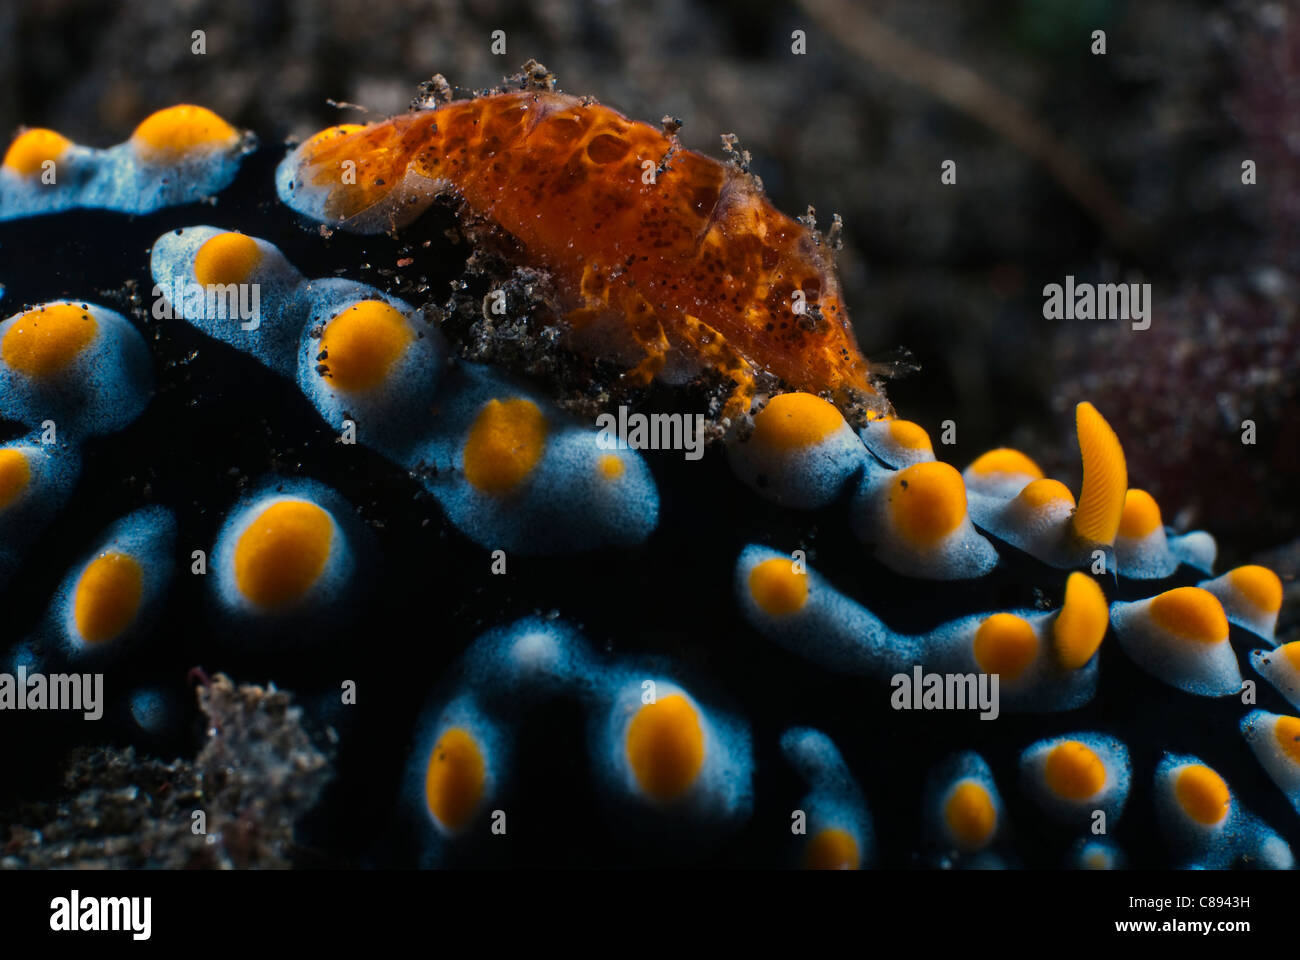 Shrimp on a black Phyllidia nudibranch with blue ridges with yellow warts under water. Stock Photo